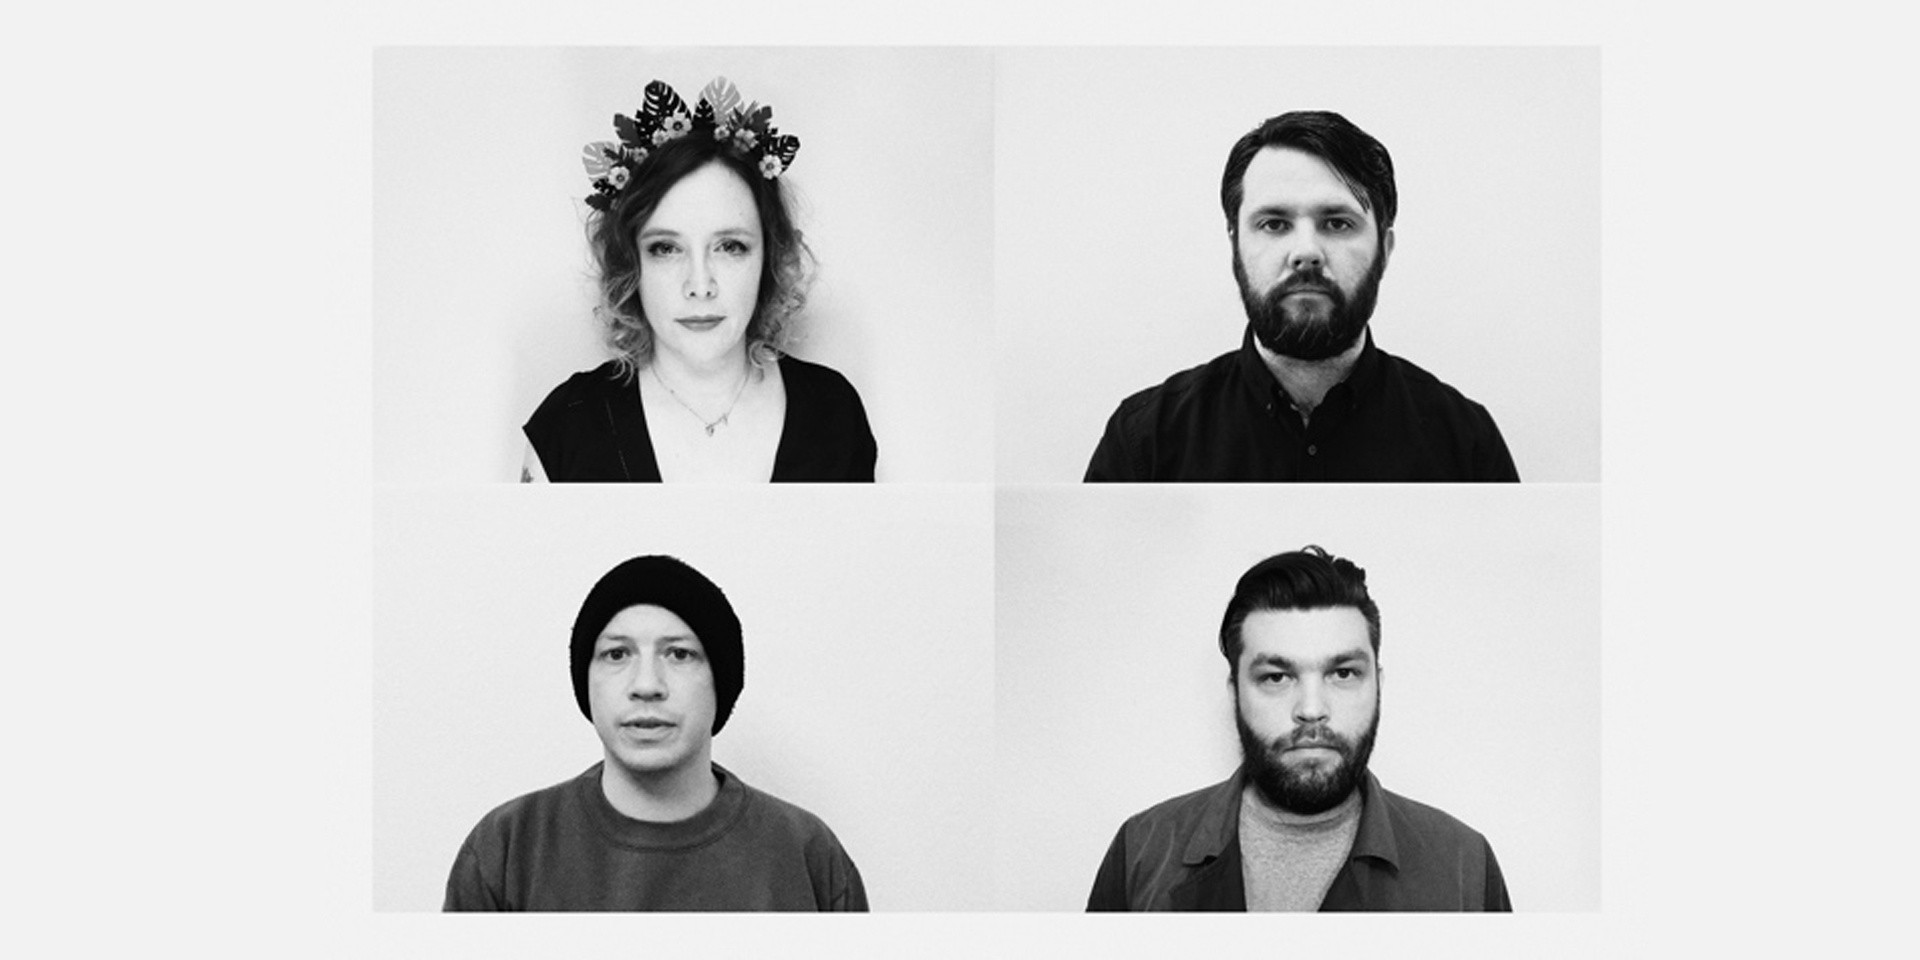 WATCH: Members from Slowdive, Mogwai and Editors form supergroup, release ‘A Hundred Ropes’